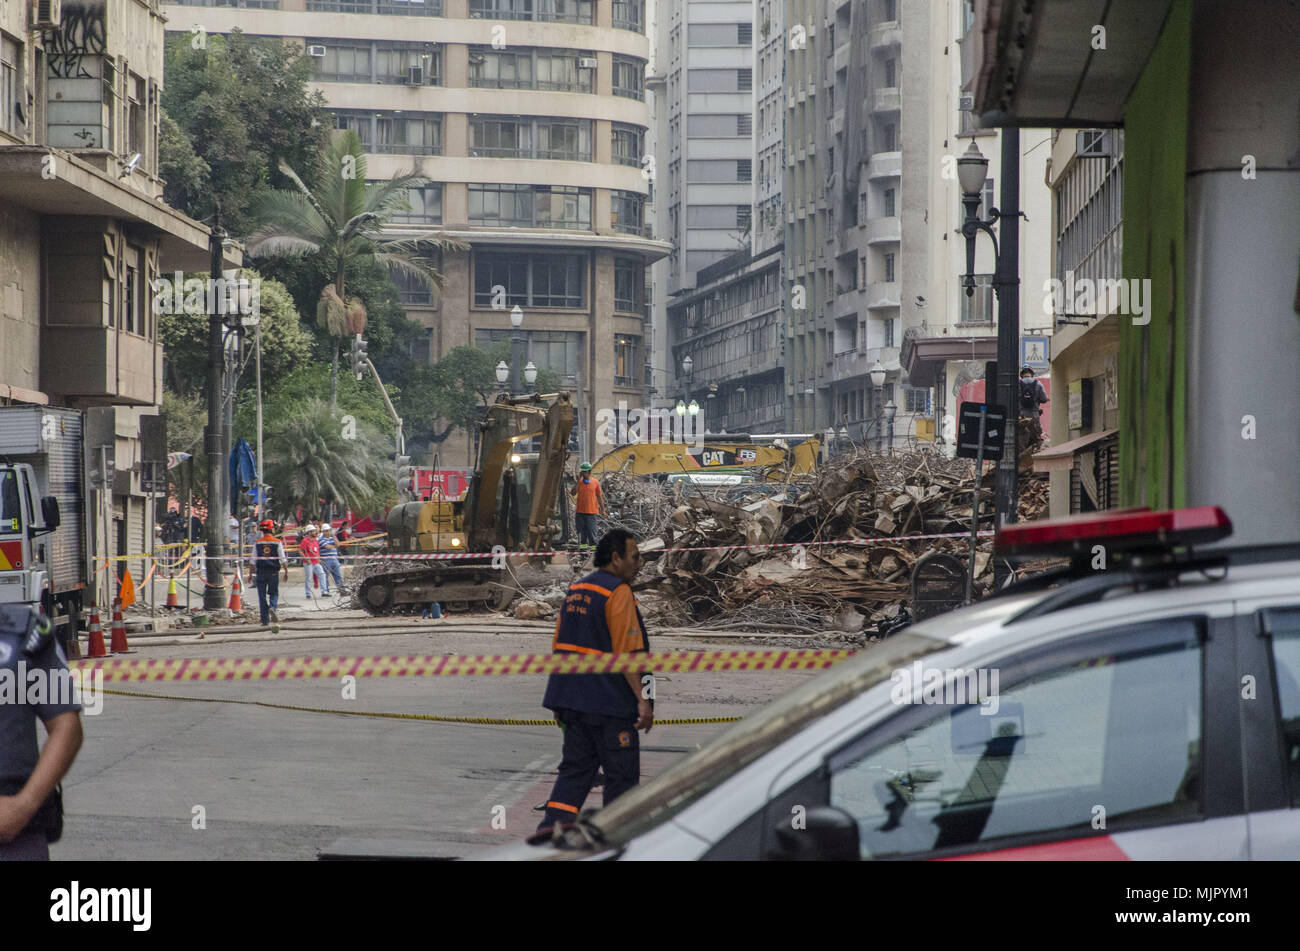 Sao Paulo, Brazil, 5 May 2018. Five days after the fire, cleaning is on-going on the smoking debris from the collapse of a building in Central Sao Paulo Credit: LynxDaemon/Alamy Live News Stock Photo